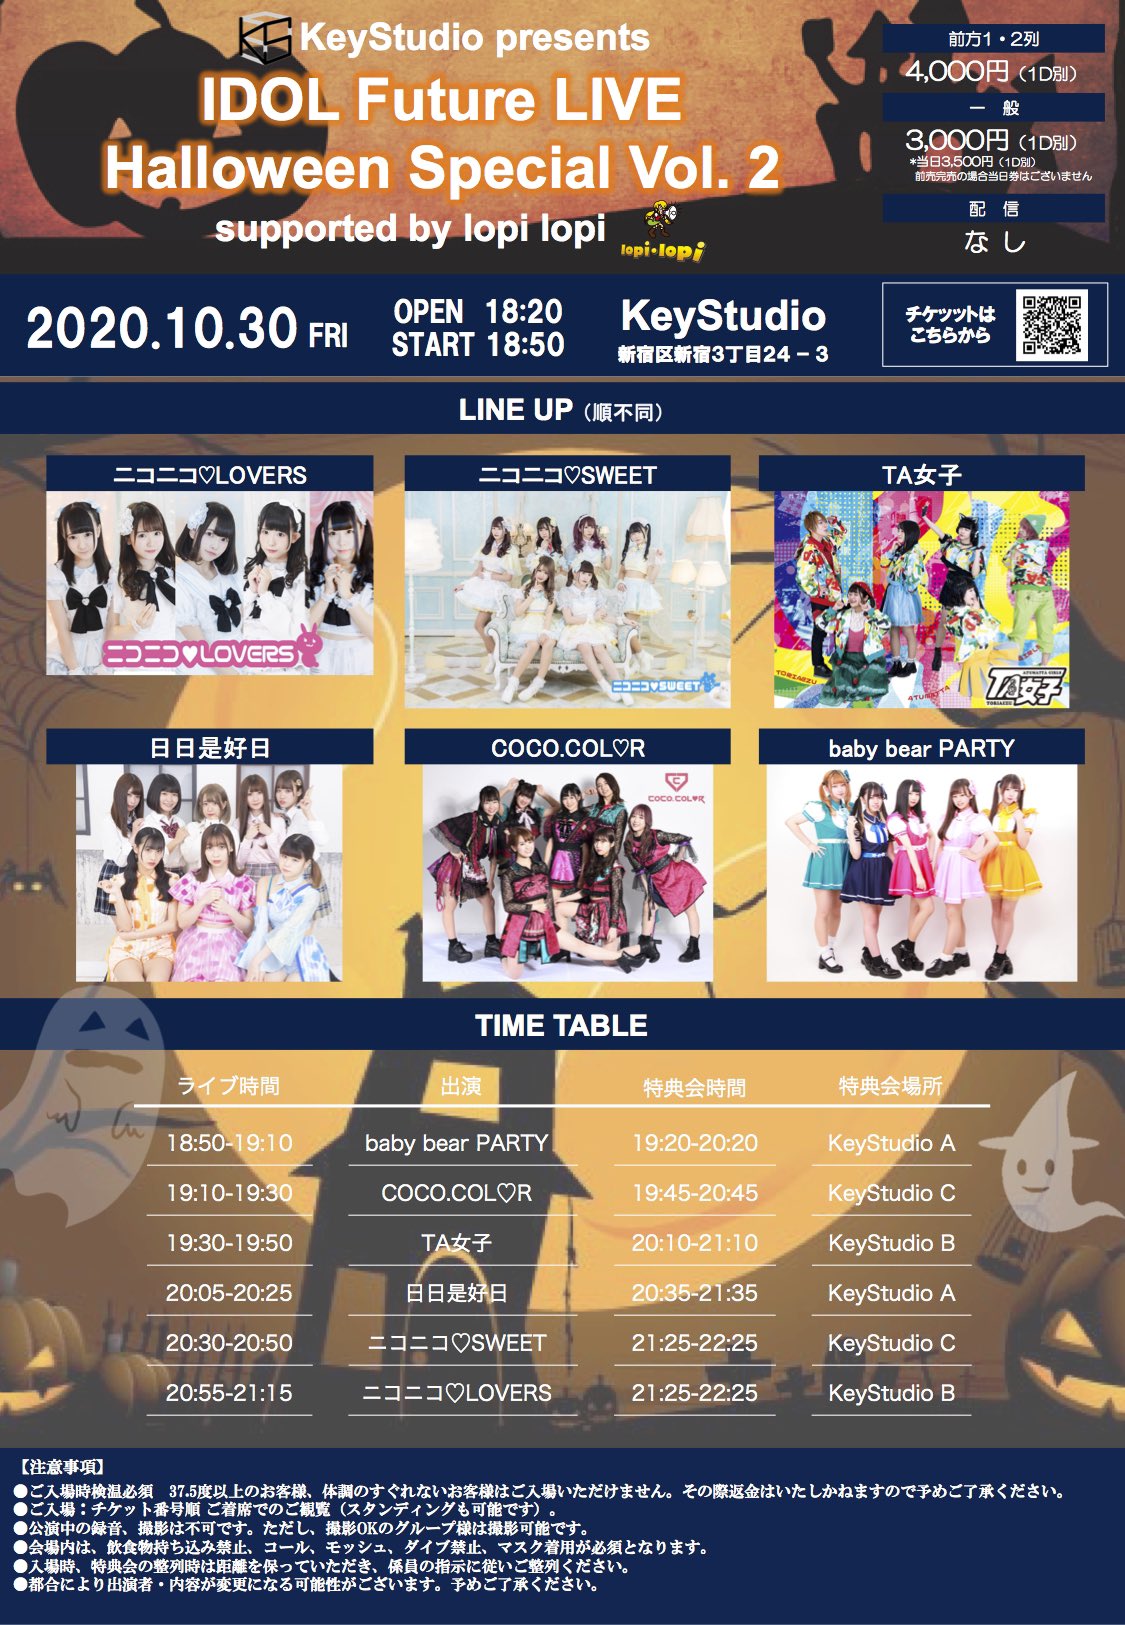 IDOL Future LIVE Halloween Special Vol.2 supported by lopi lopi